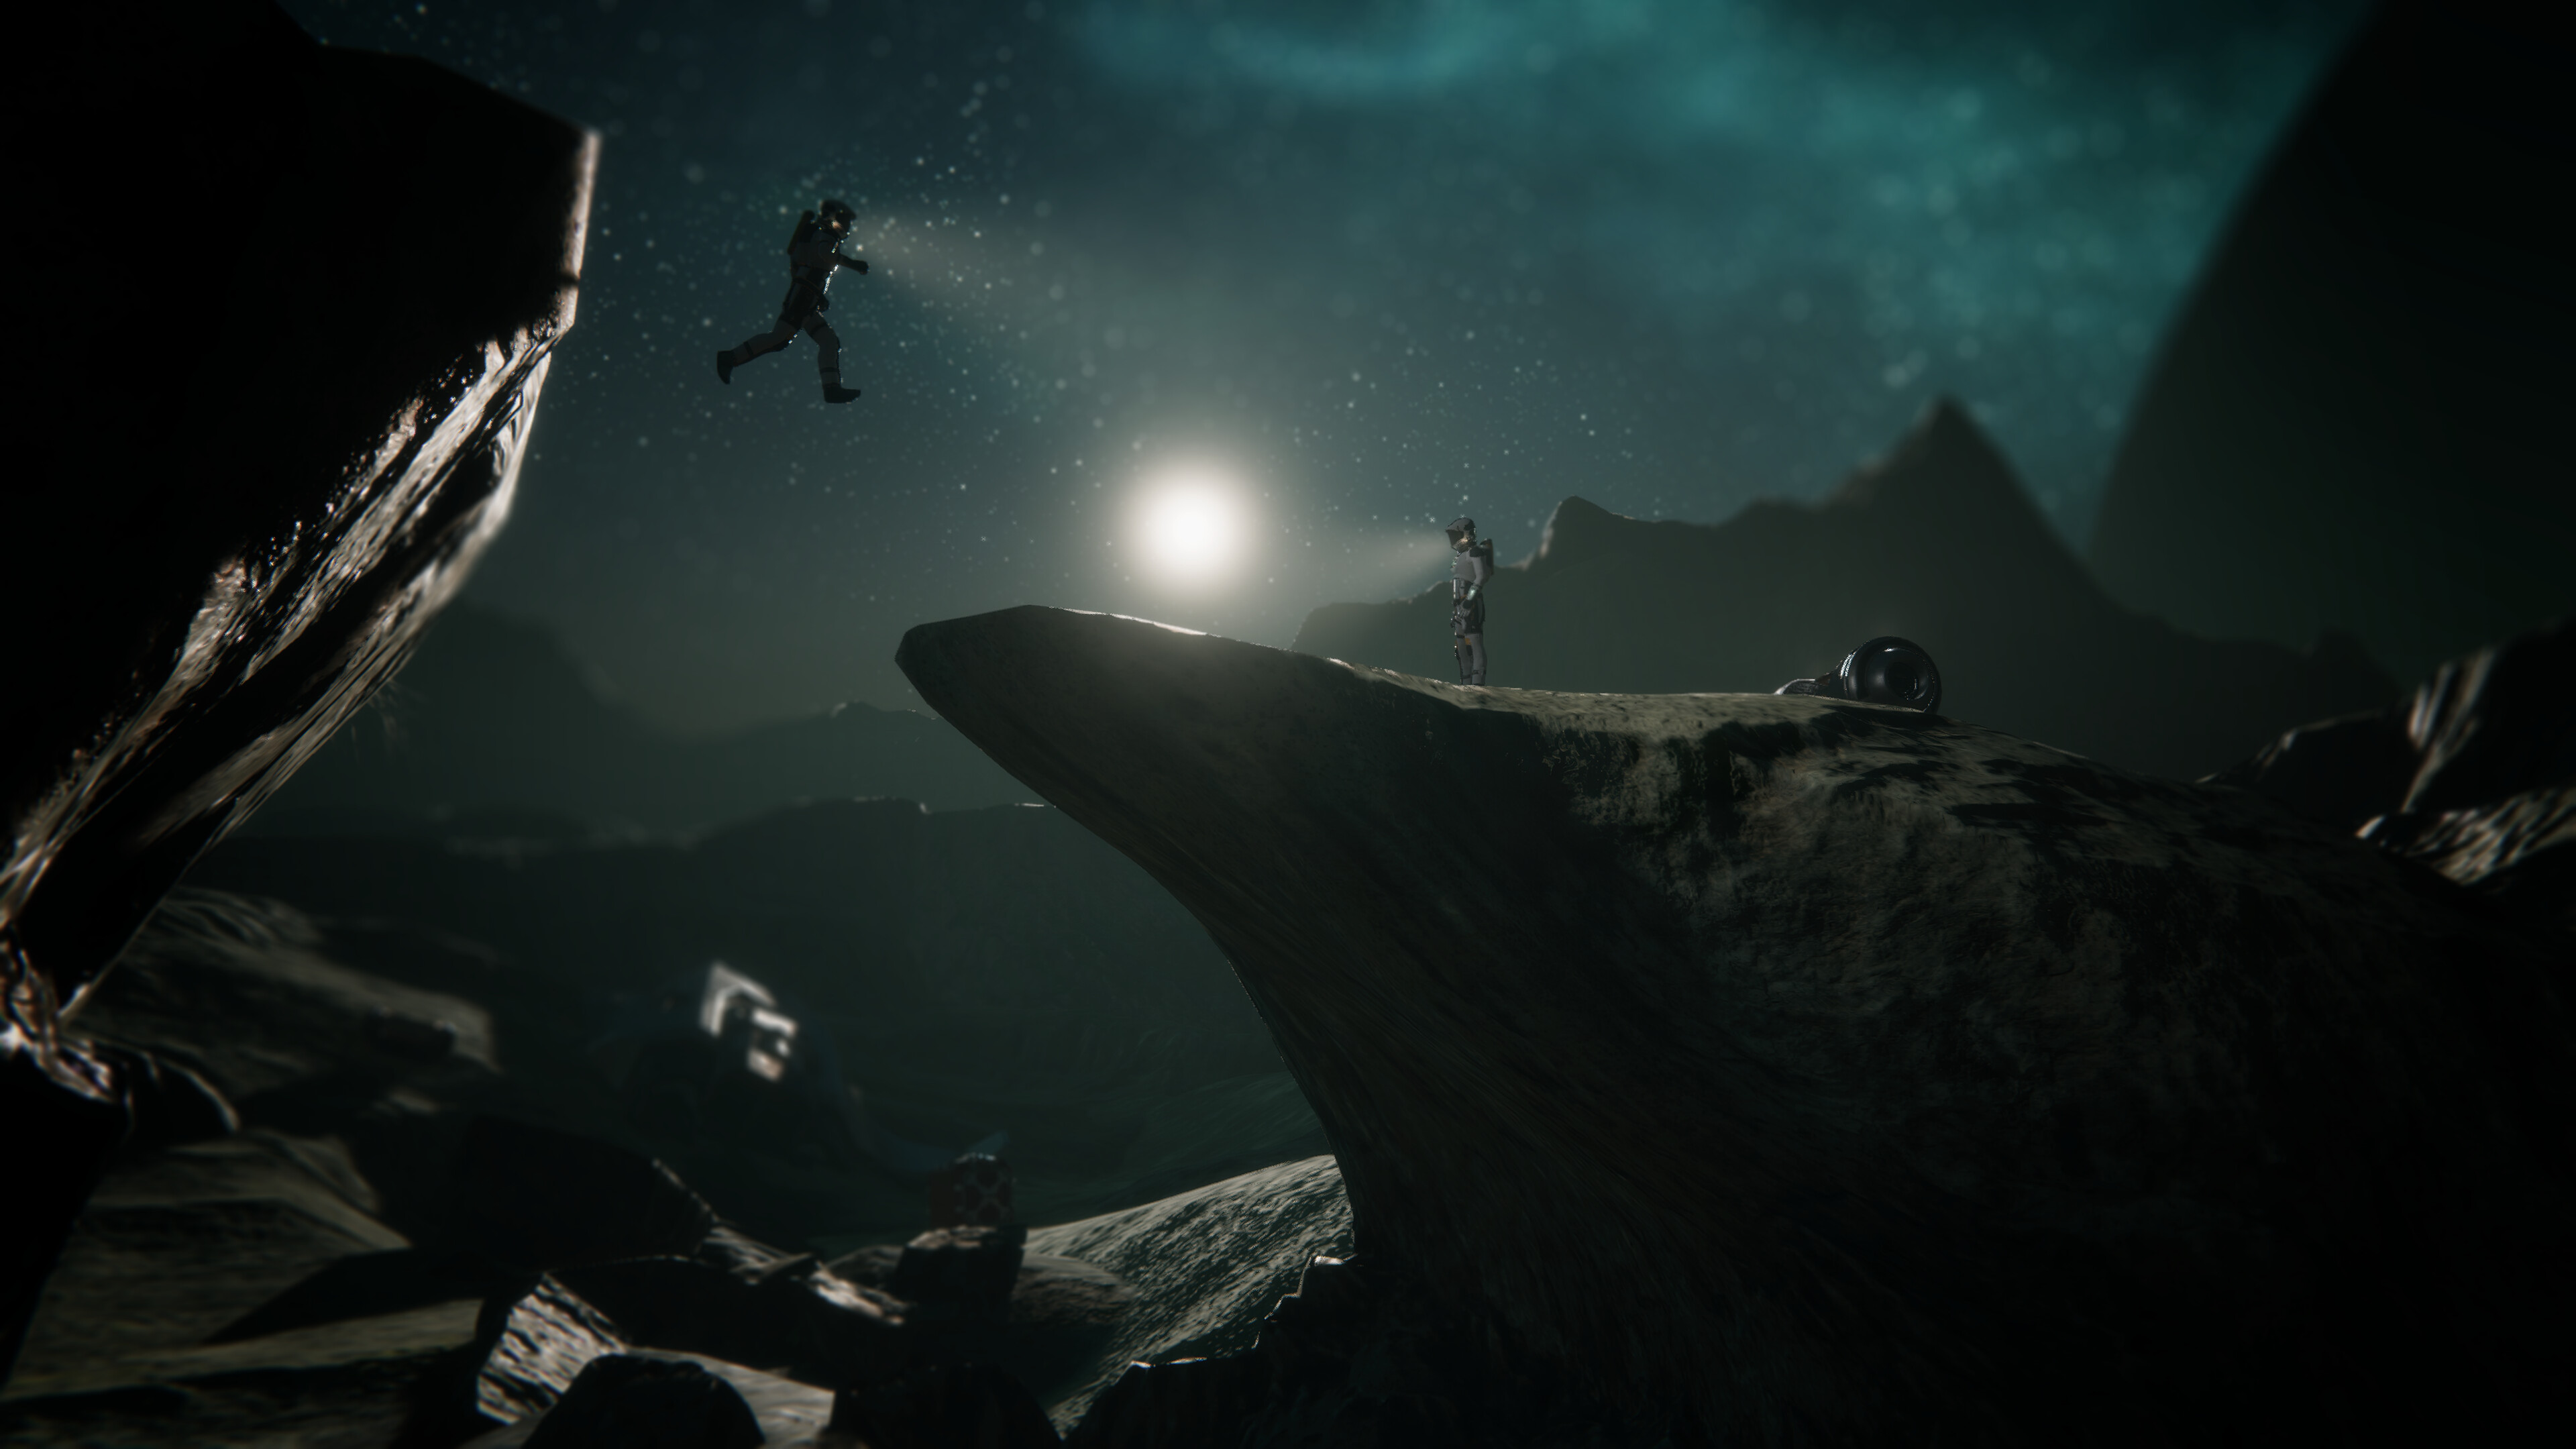 The Pioneers: Surviving Desolation Free Download for PC